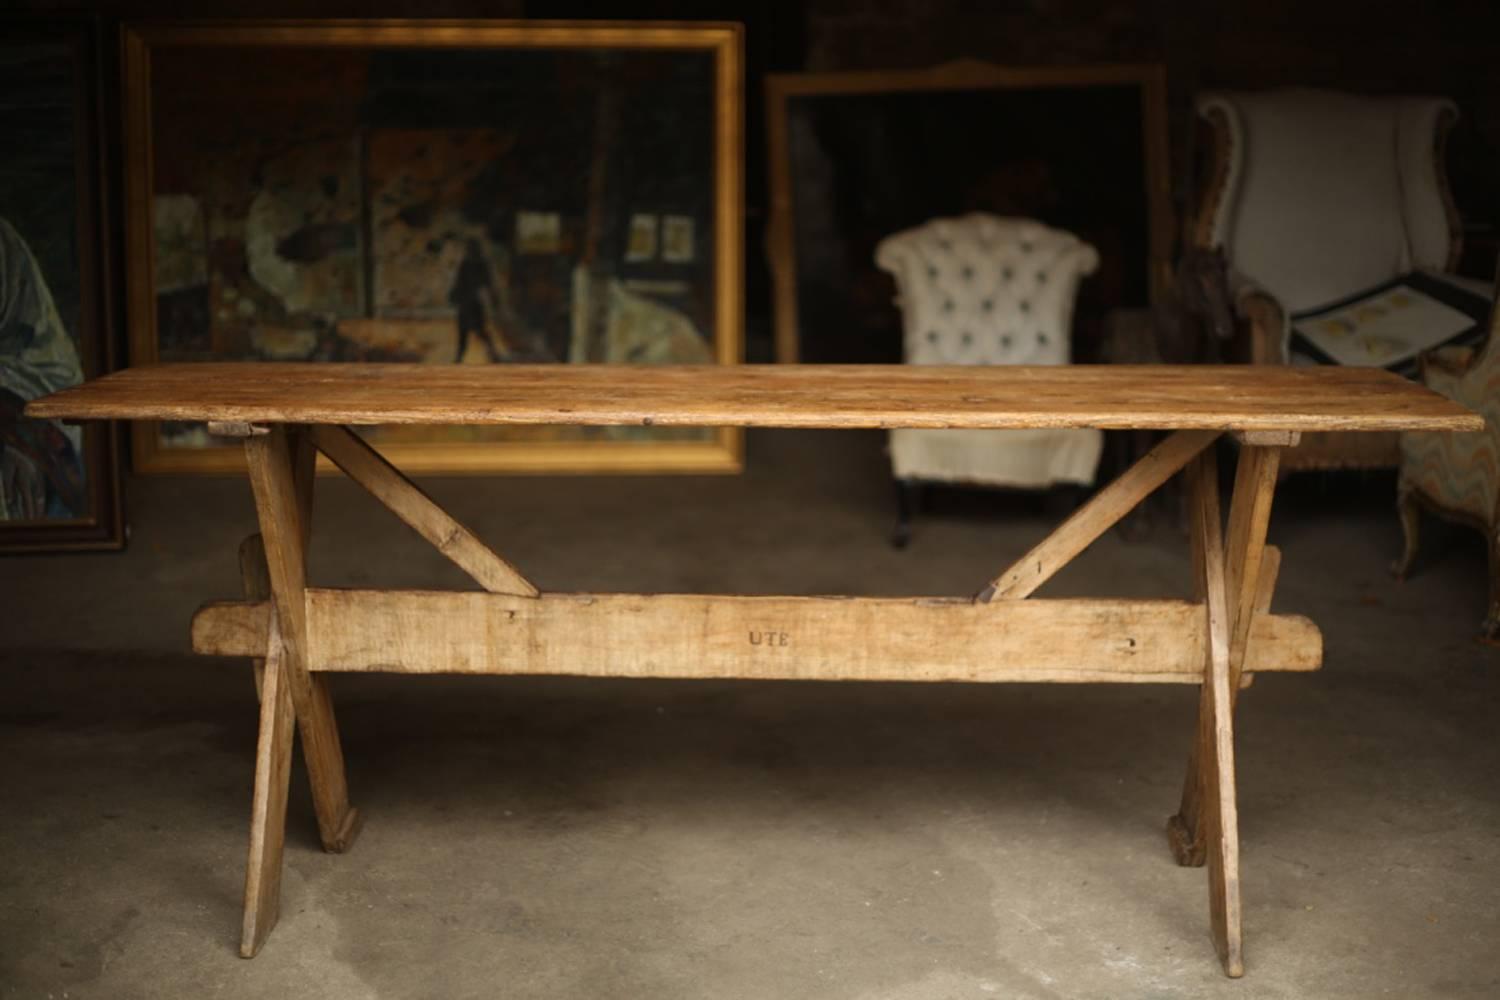 This is an exceptional 18th century X-frame tavern table. It is a superb design with a very simplistic construction but very high quality. It has honest old repairs to the feet (additions) and stretchers (iron bracket support). The top has some